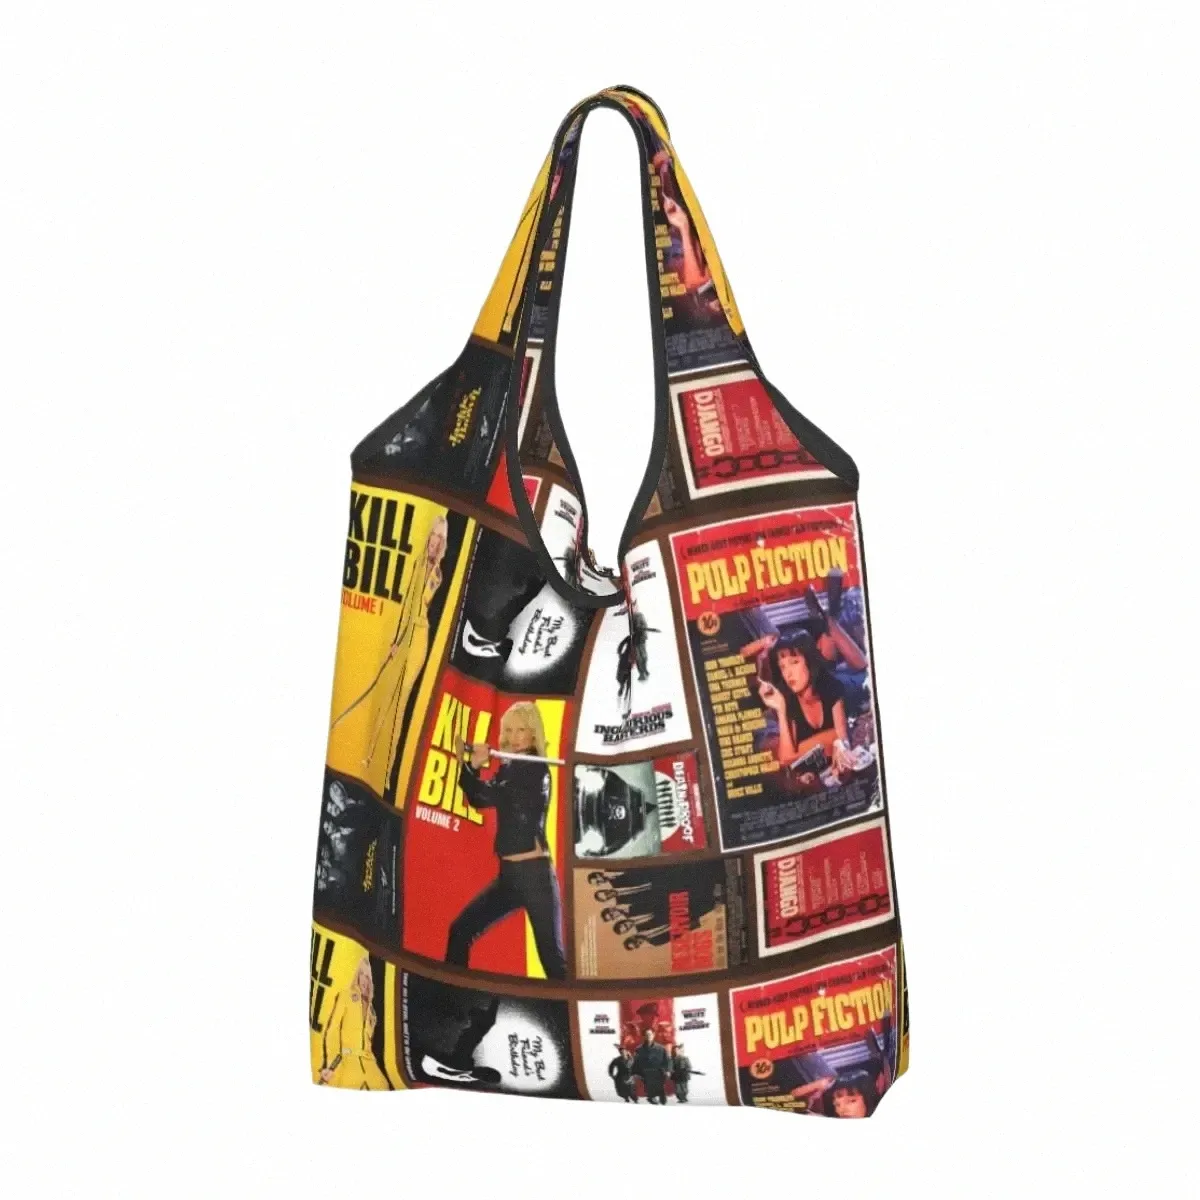 Recycling Quentin Tarantino Movie Collage Shop Tas Women Tote Bag draagbare pulp ficti Kill Bill Grocery Shopper Bags 06ig#